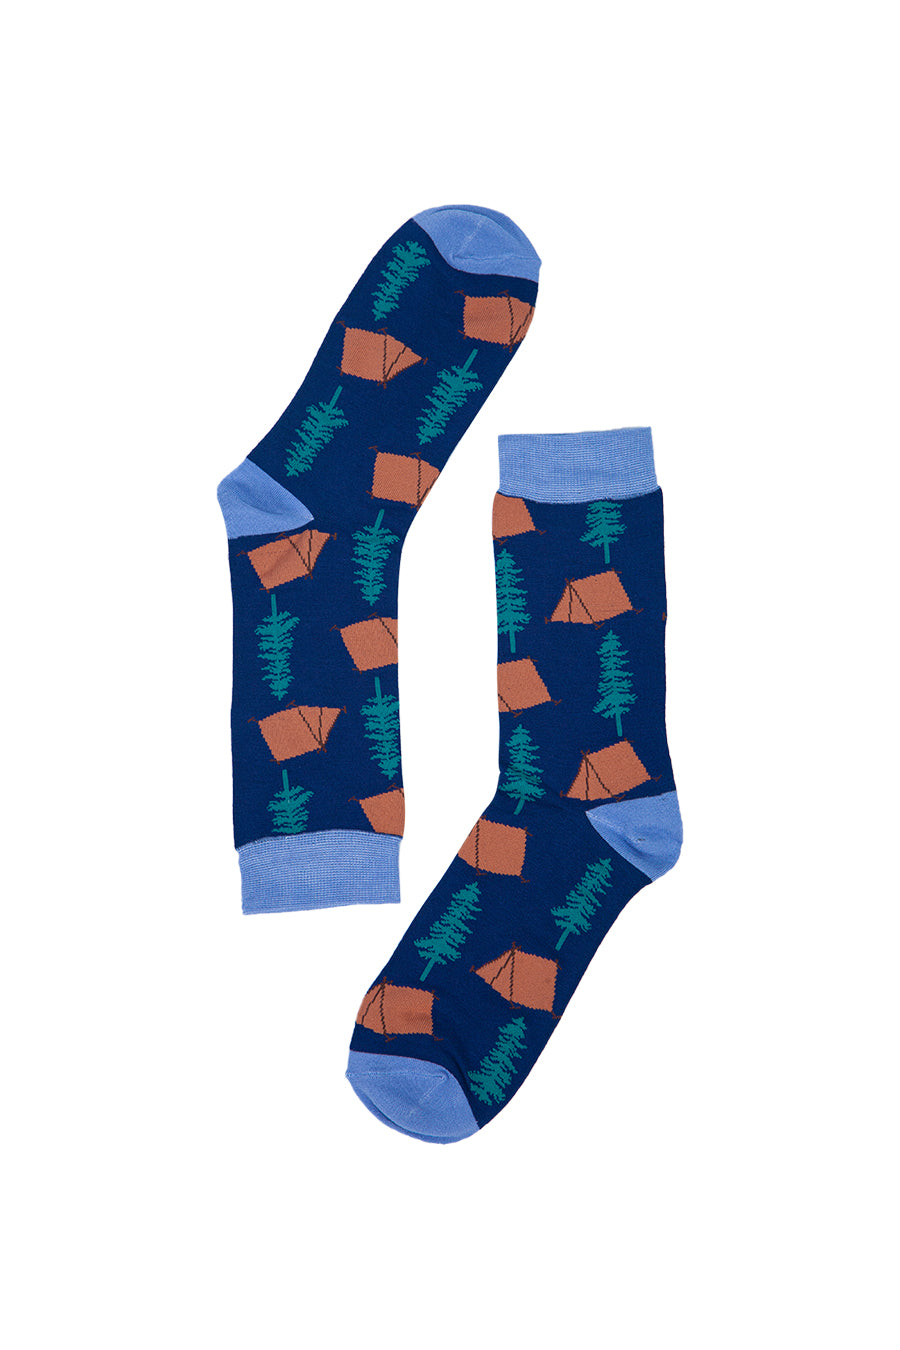 camping themed bamboo socks with tents, trees, and campfires